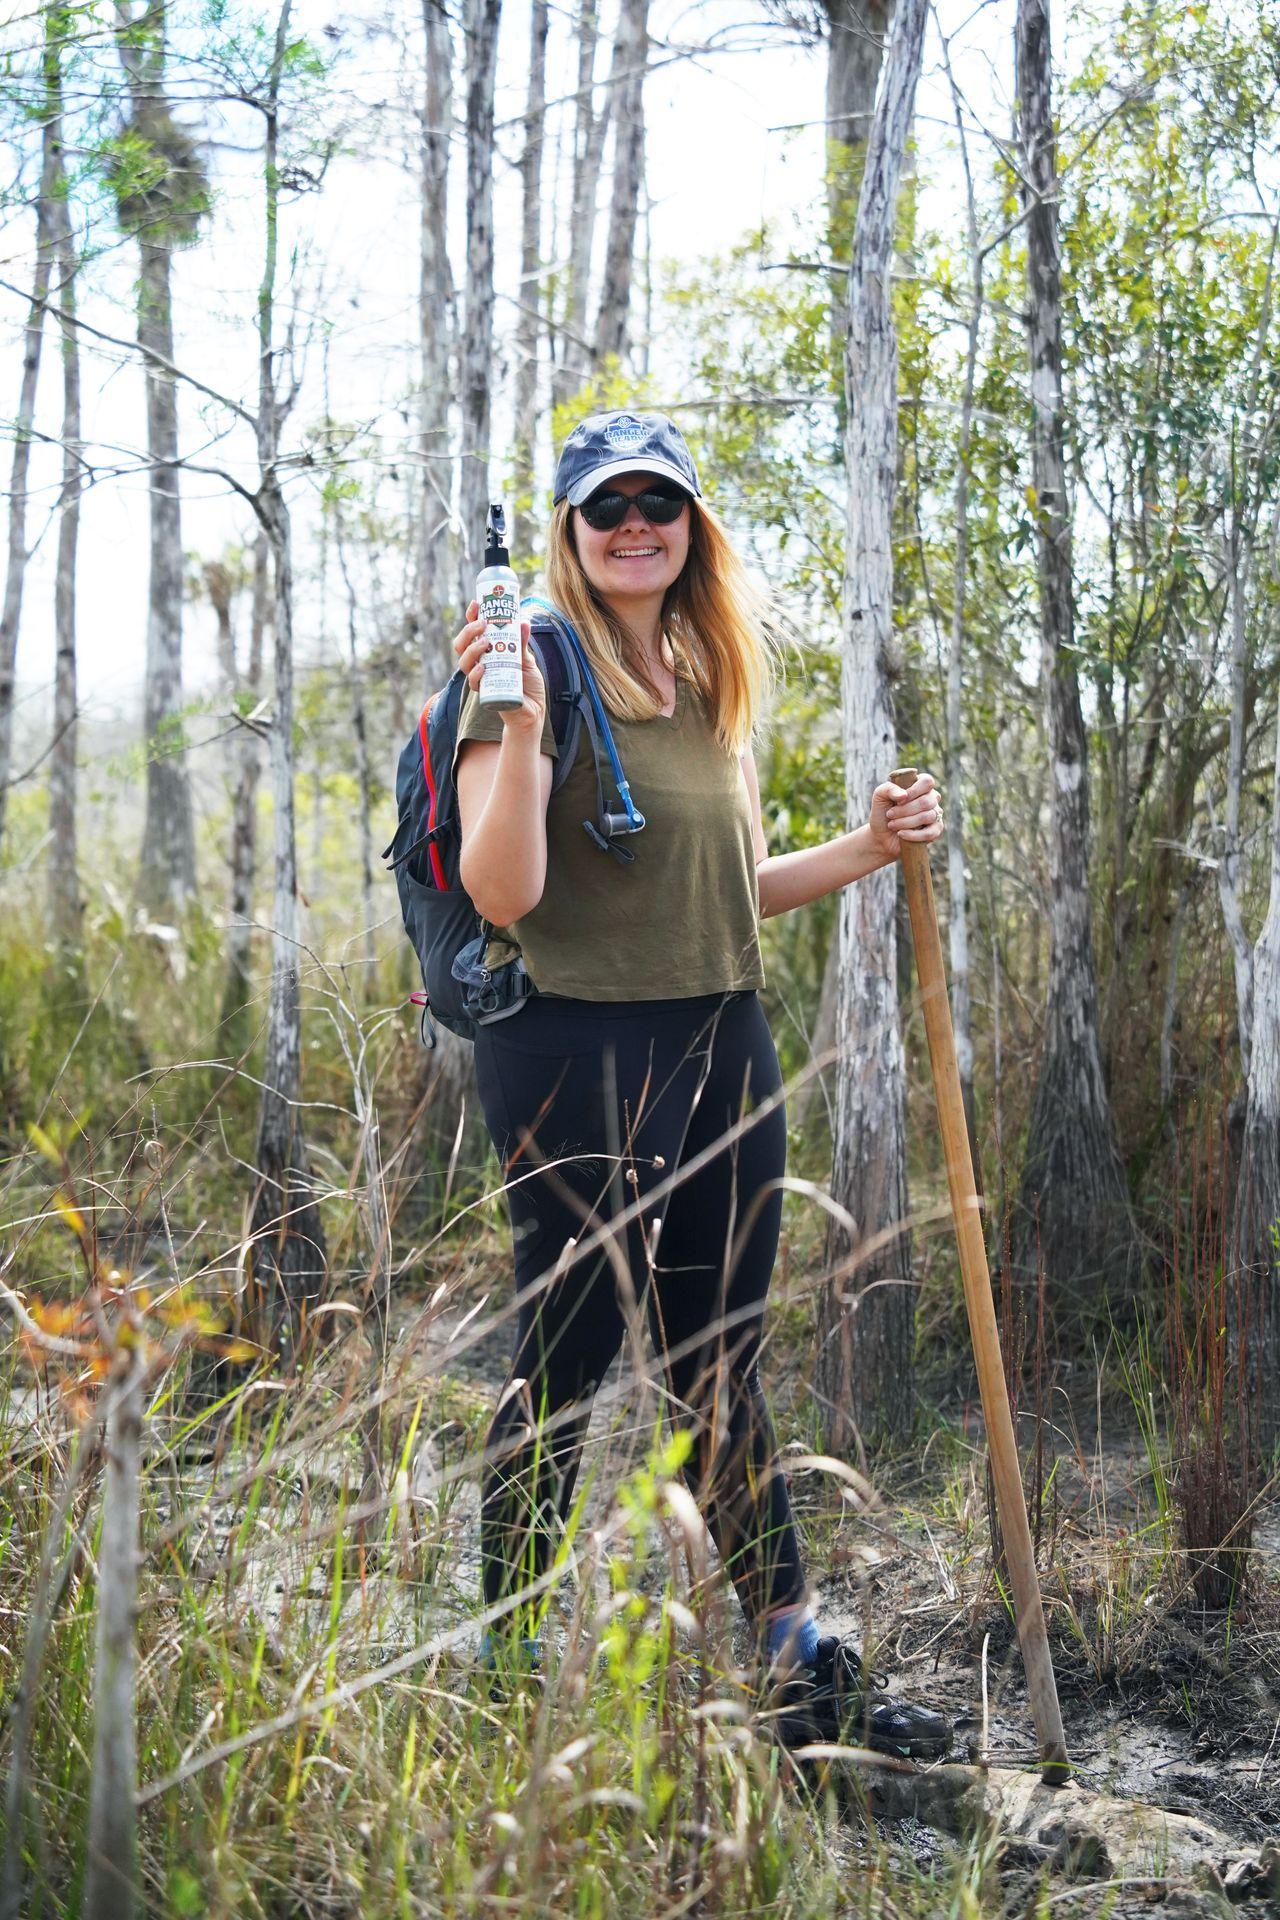 Lydia holding up a bottle of Ranger Ready in Big Cypress National Preserve.